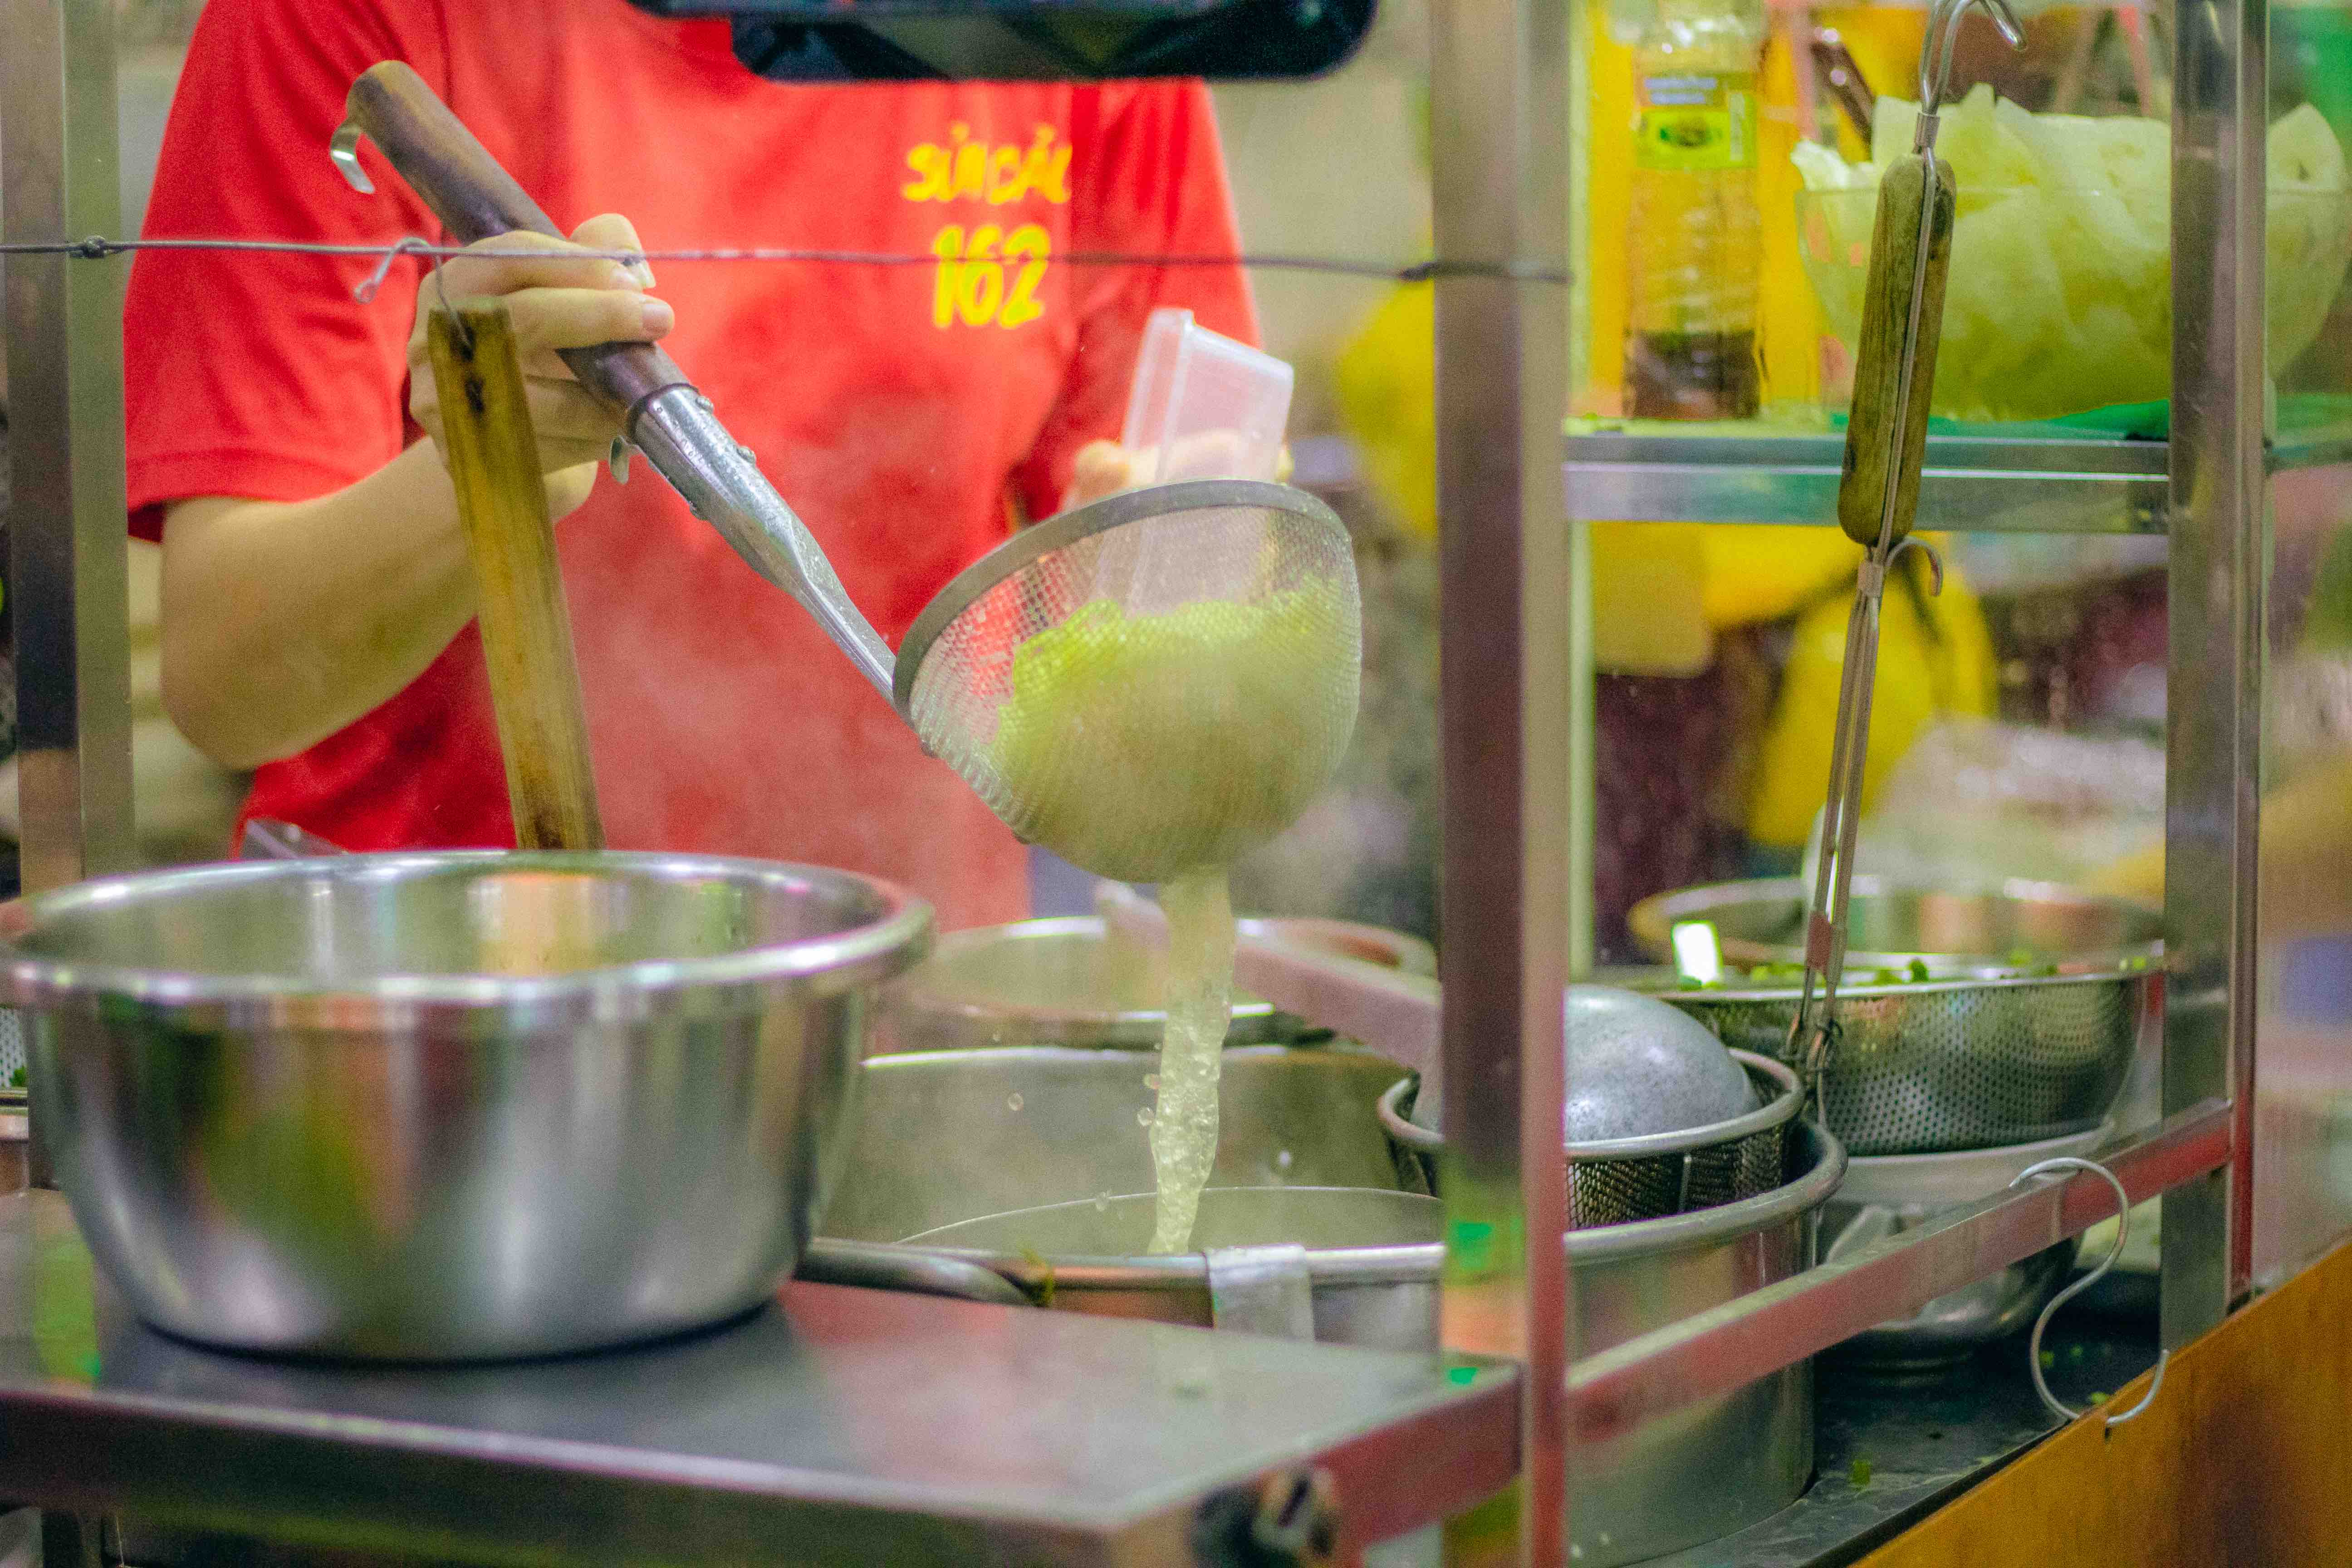 A woman prepares shuijiao with golden egg noodles at a stall on Ha Ton Quyen Street, District 11, Ho Chi Minh City. Photo: Linh To / Tuoi Tre News